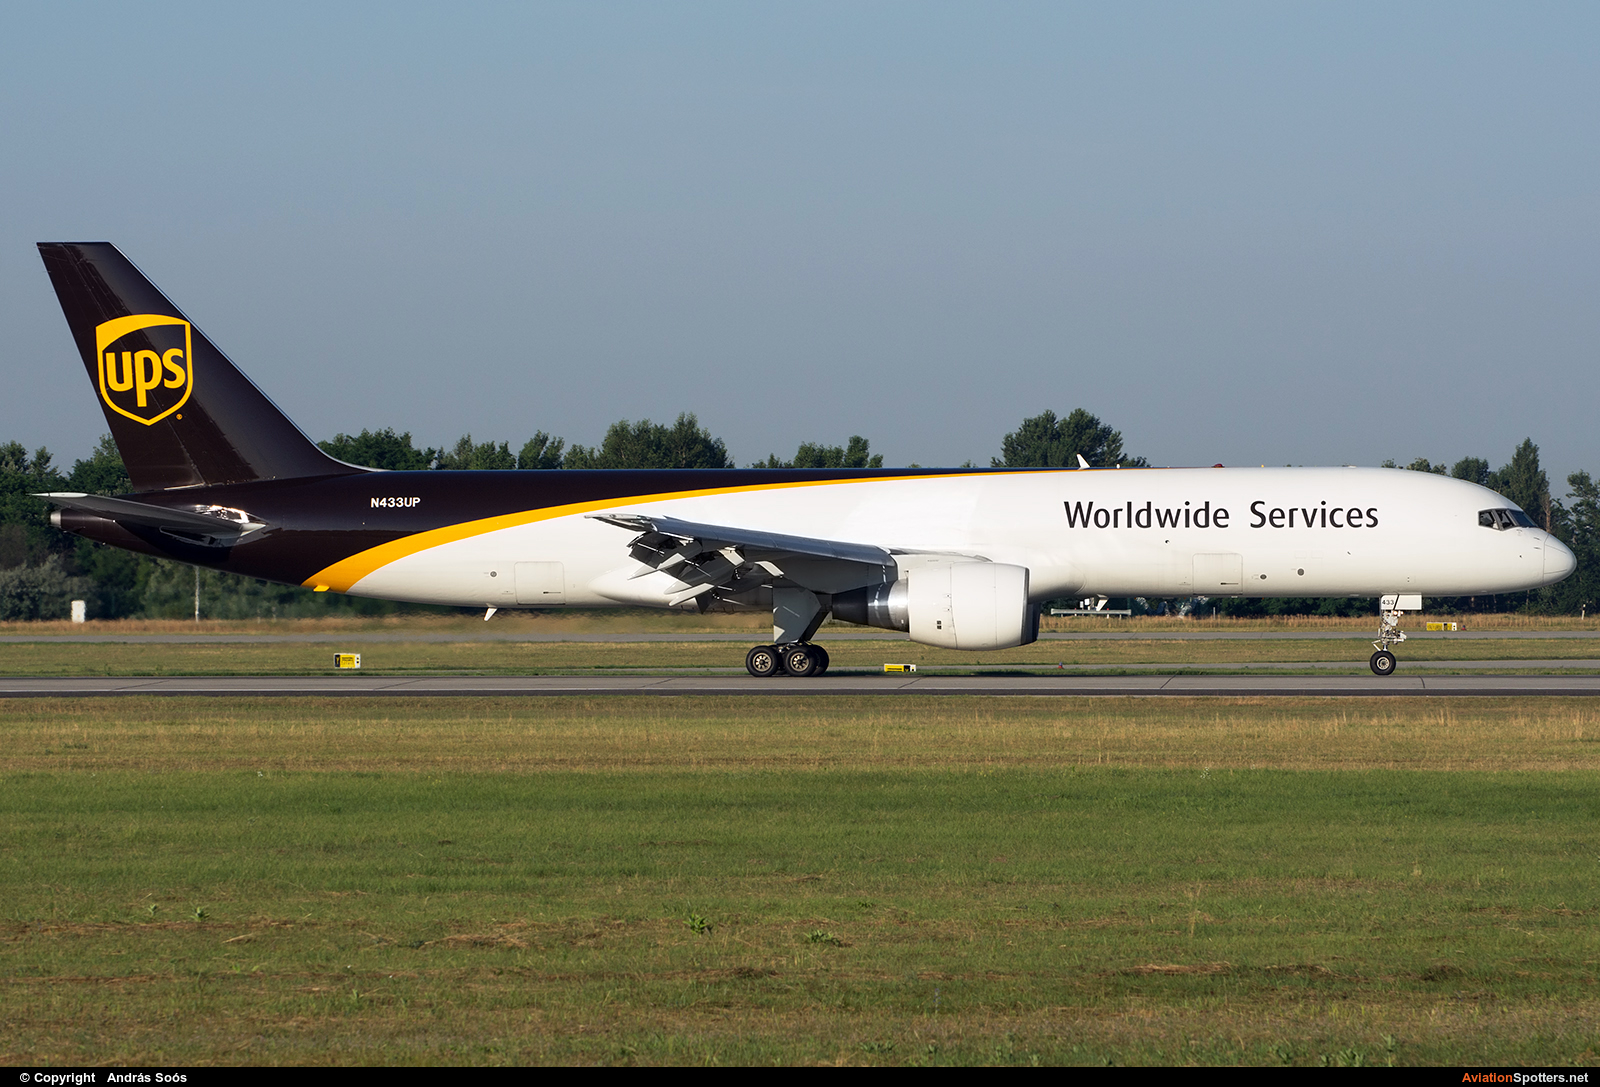 UPS - United Parcel Service  -  757-200F  (N433UP) By András Soós (sas1965)